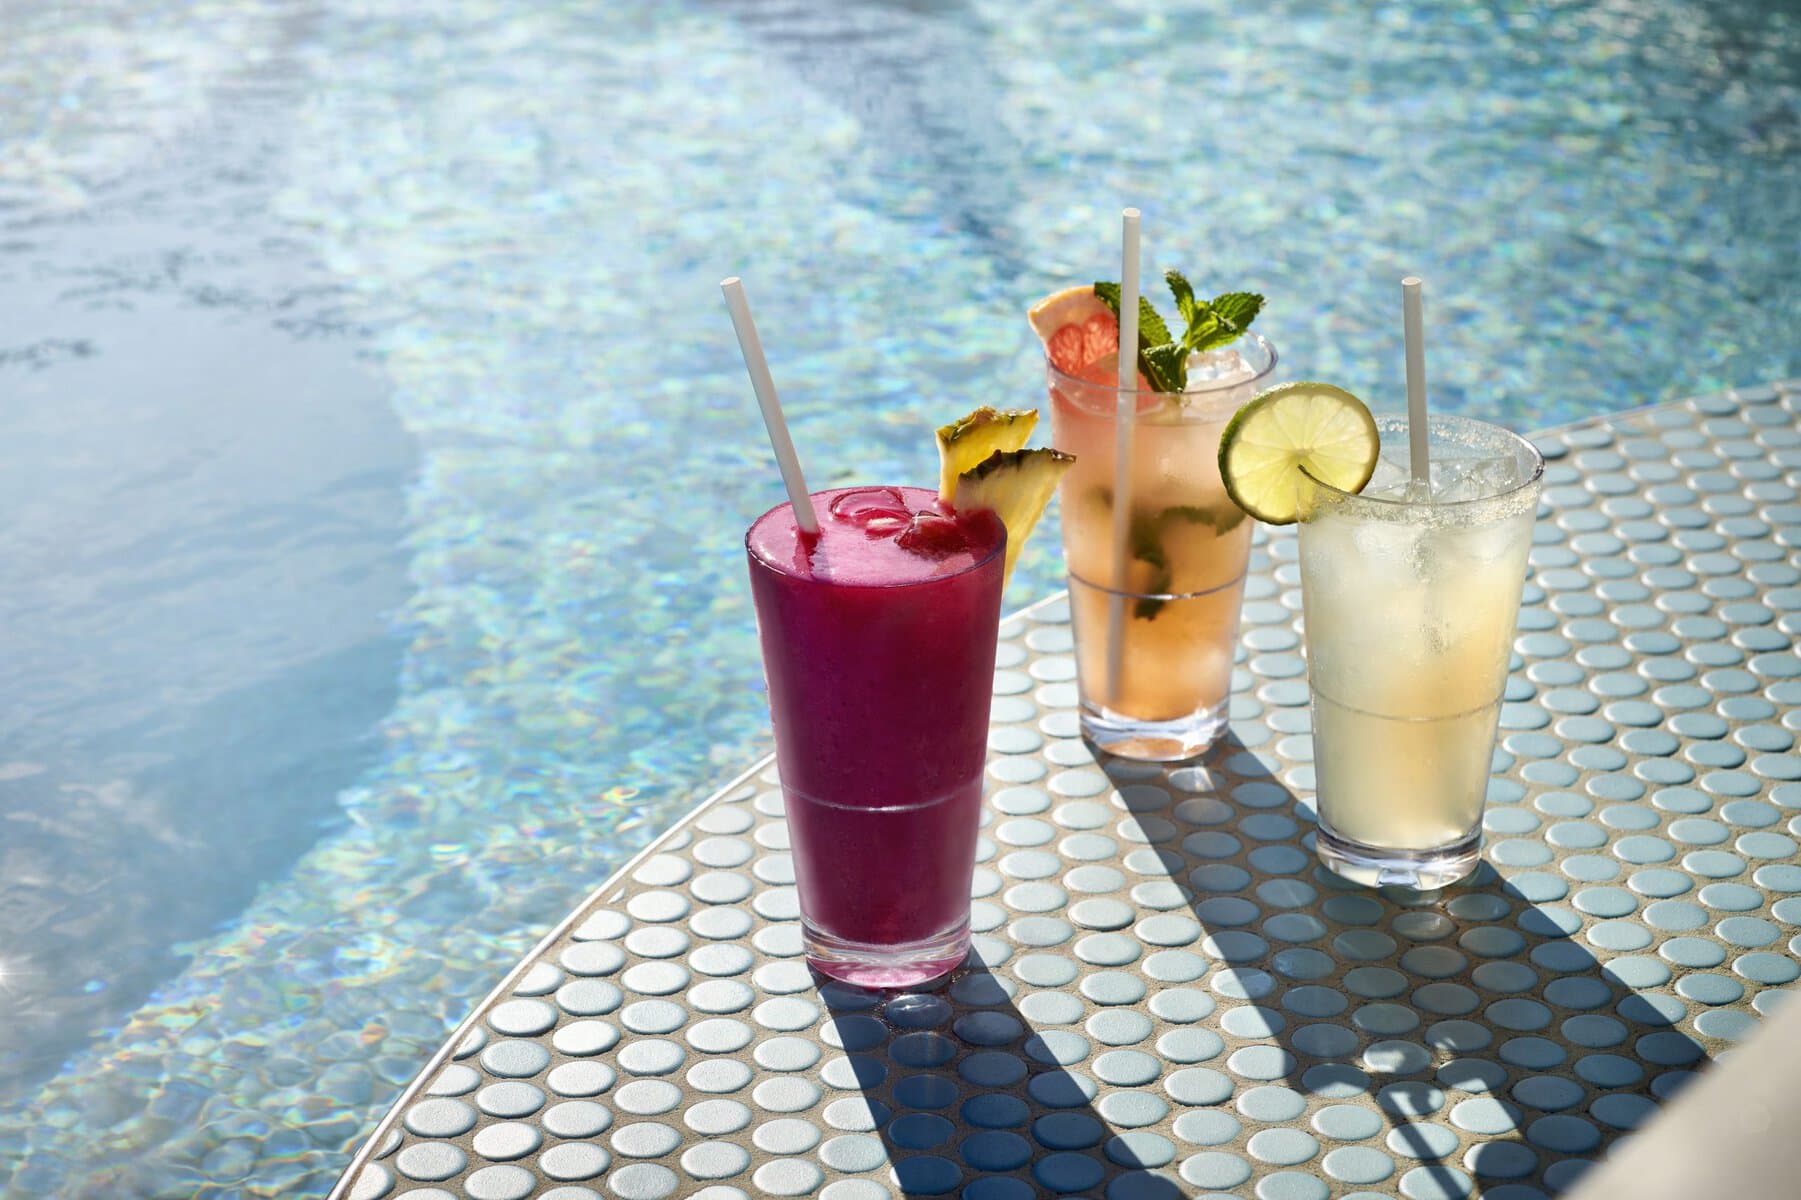 Virgin Cruise Drink Package Deal. Is Virgin Voyages all inclusive?